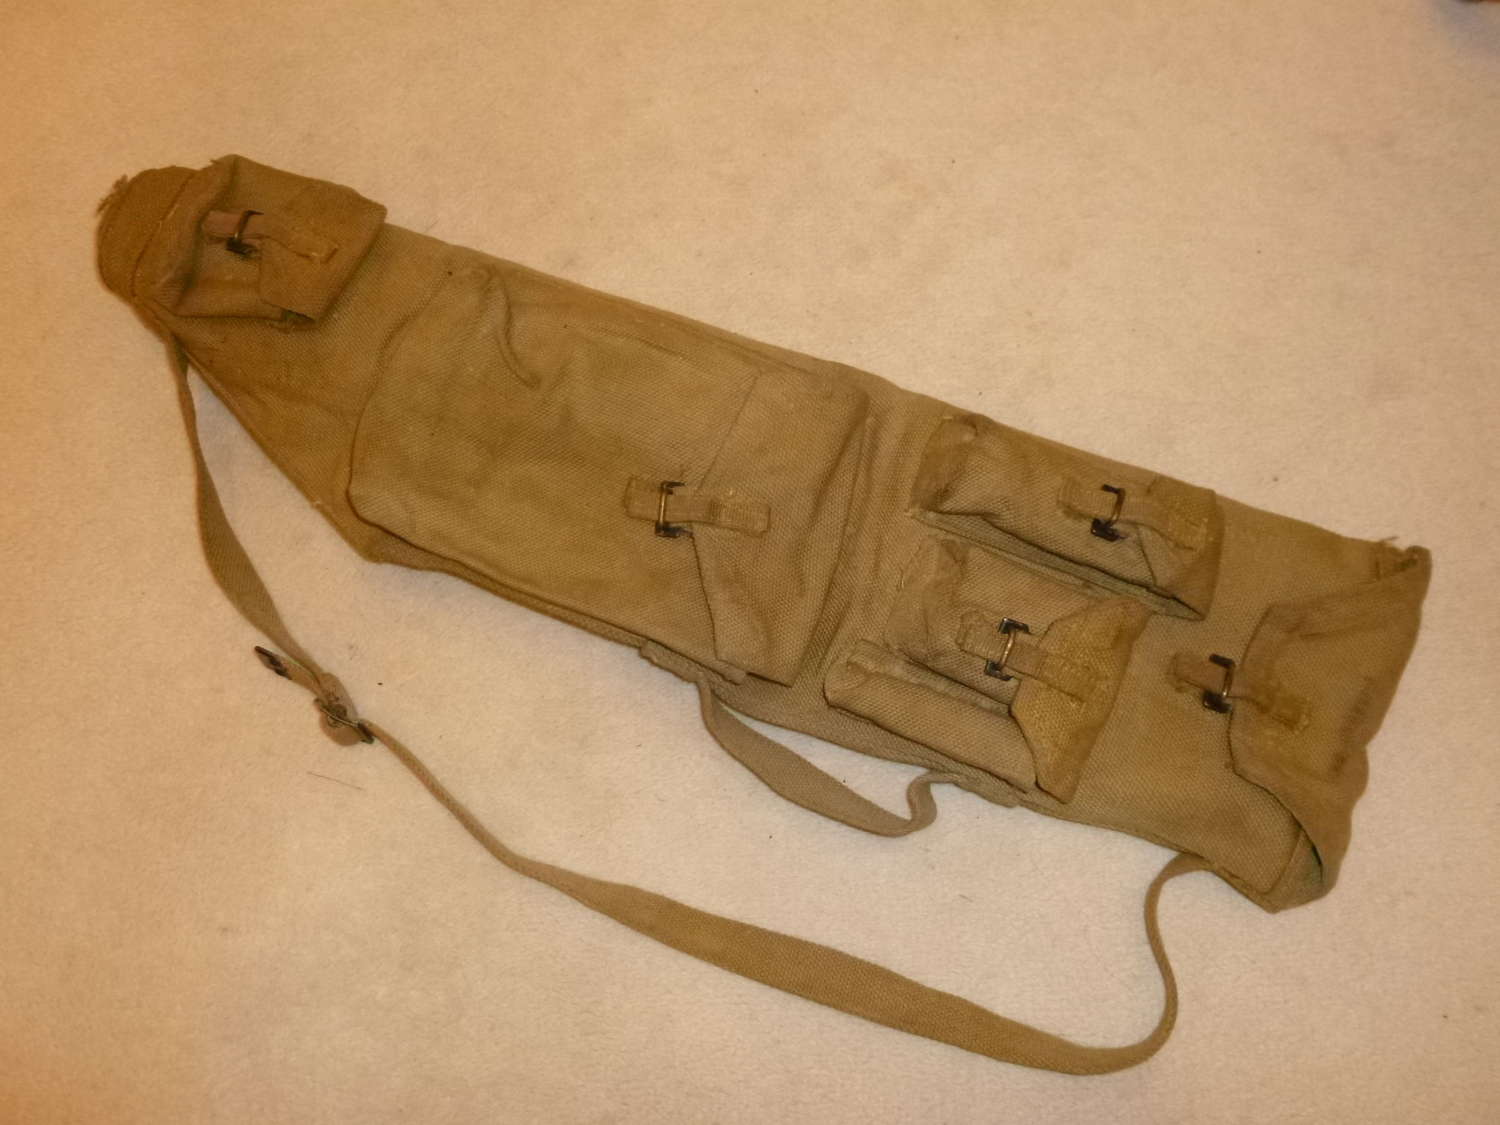 British Army Bren spare barrel case and contents